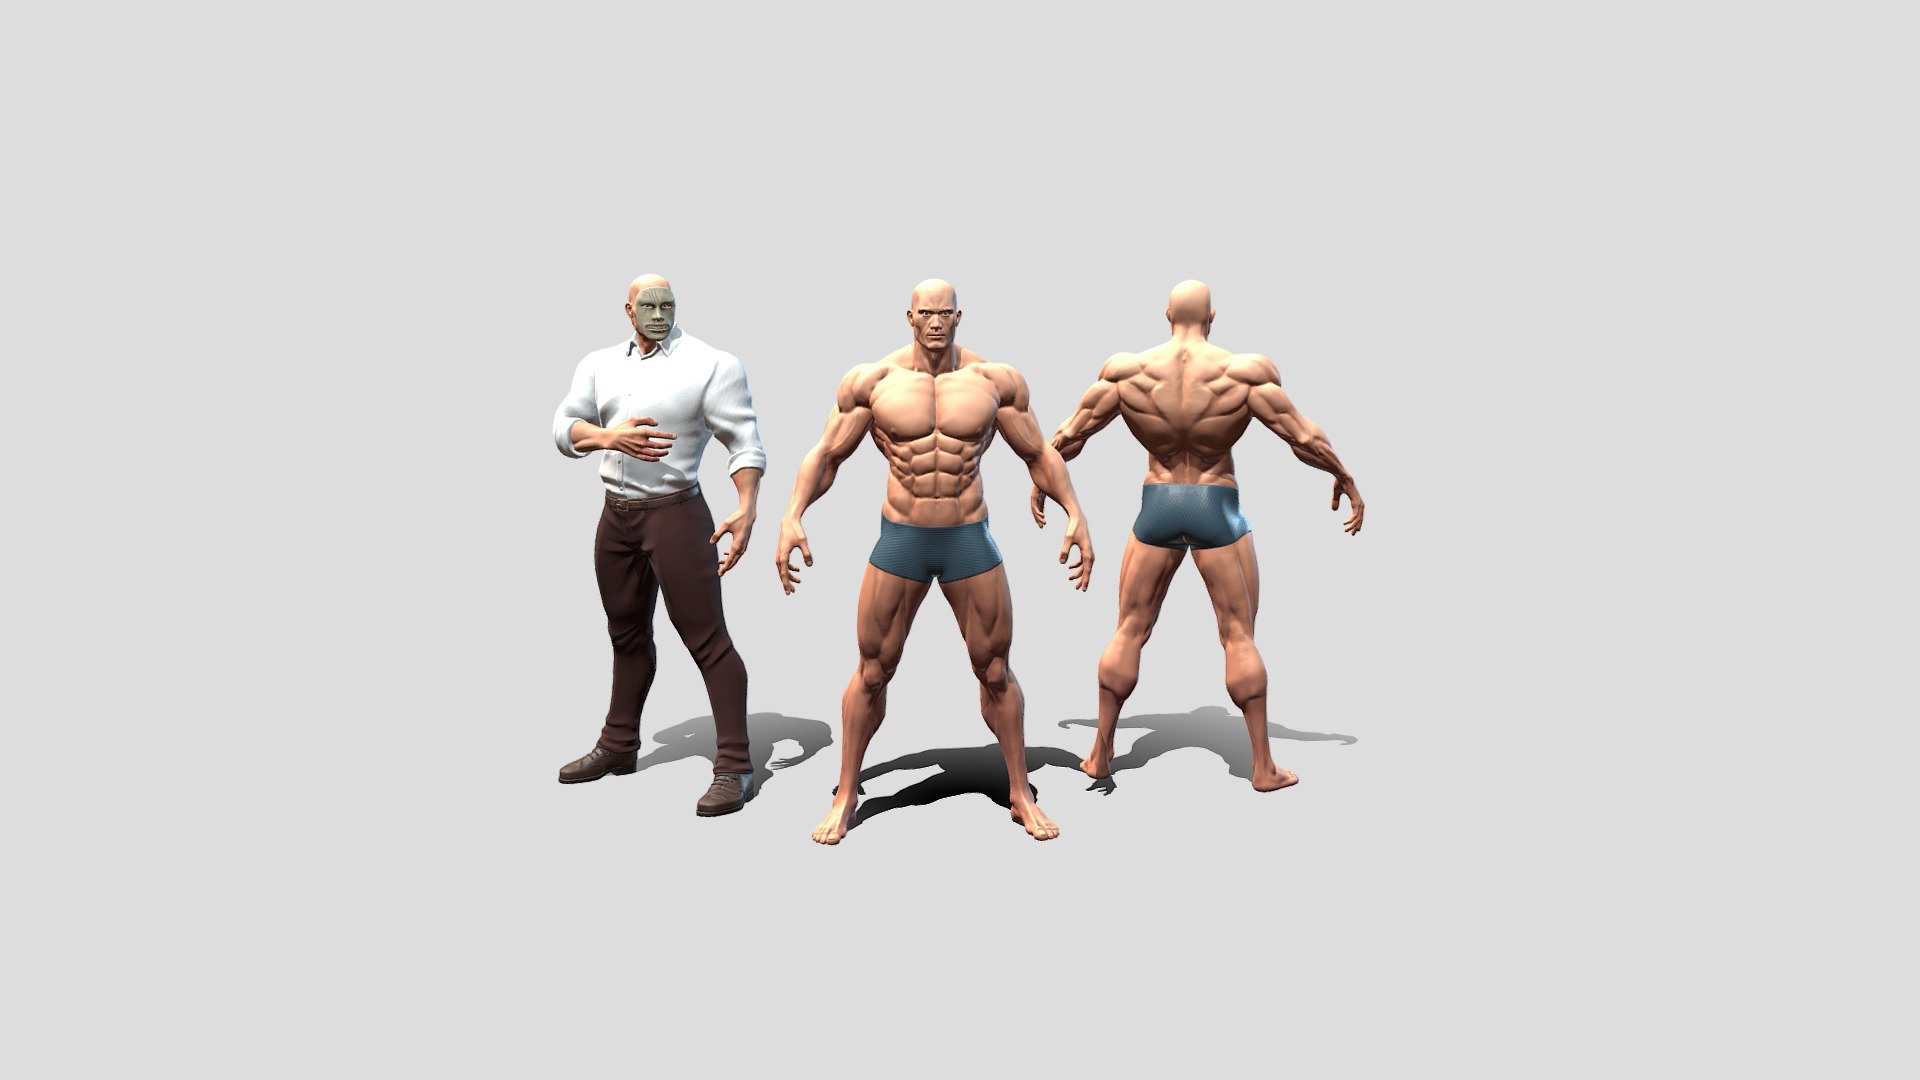 Big modular muscular male character, low-poly model , with horror mask Rigged (Humanoid Skeleton) and ready for games and other applications

They are archive with files for mesh textures and UE and Unity projects 

Video preview with demo animations test scene UE: https://www.youtube.com/watch?v=5vmdmVODtrQ

Muscular Male project includes:

Cllected and separated meshes for body and cloth +horror mask

PBR 4K textures for body and clothes and 2K textures for horror mask

3 Materials and 9 textures

Character height: 182 cm (5&lsquo;97 feet)

Vertex count: 19,200 vertices and clothes 14,500

Texture Resolutions: (body and clothes 4096x4096, mask 2048x2048)

Rigged for Unity (Humanoid Skeleton)

Rigged for UE (Epic skeleton) - Modular Muscular Male Game ready Low-poly - Buy Royalty Free 3D model by SakoSculpt 3d model